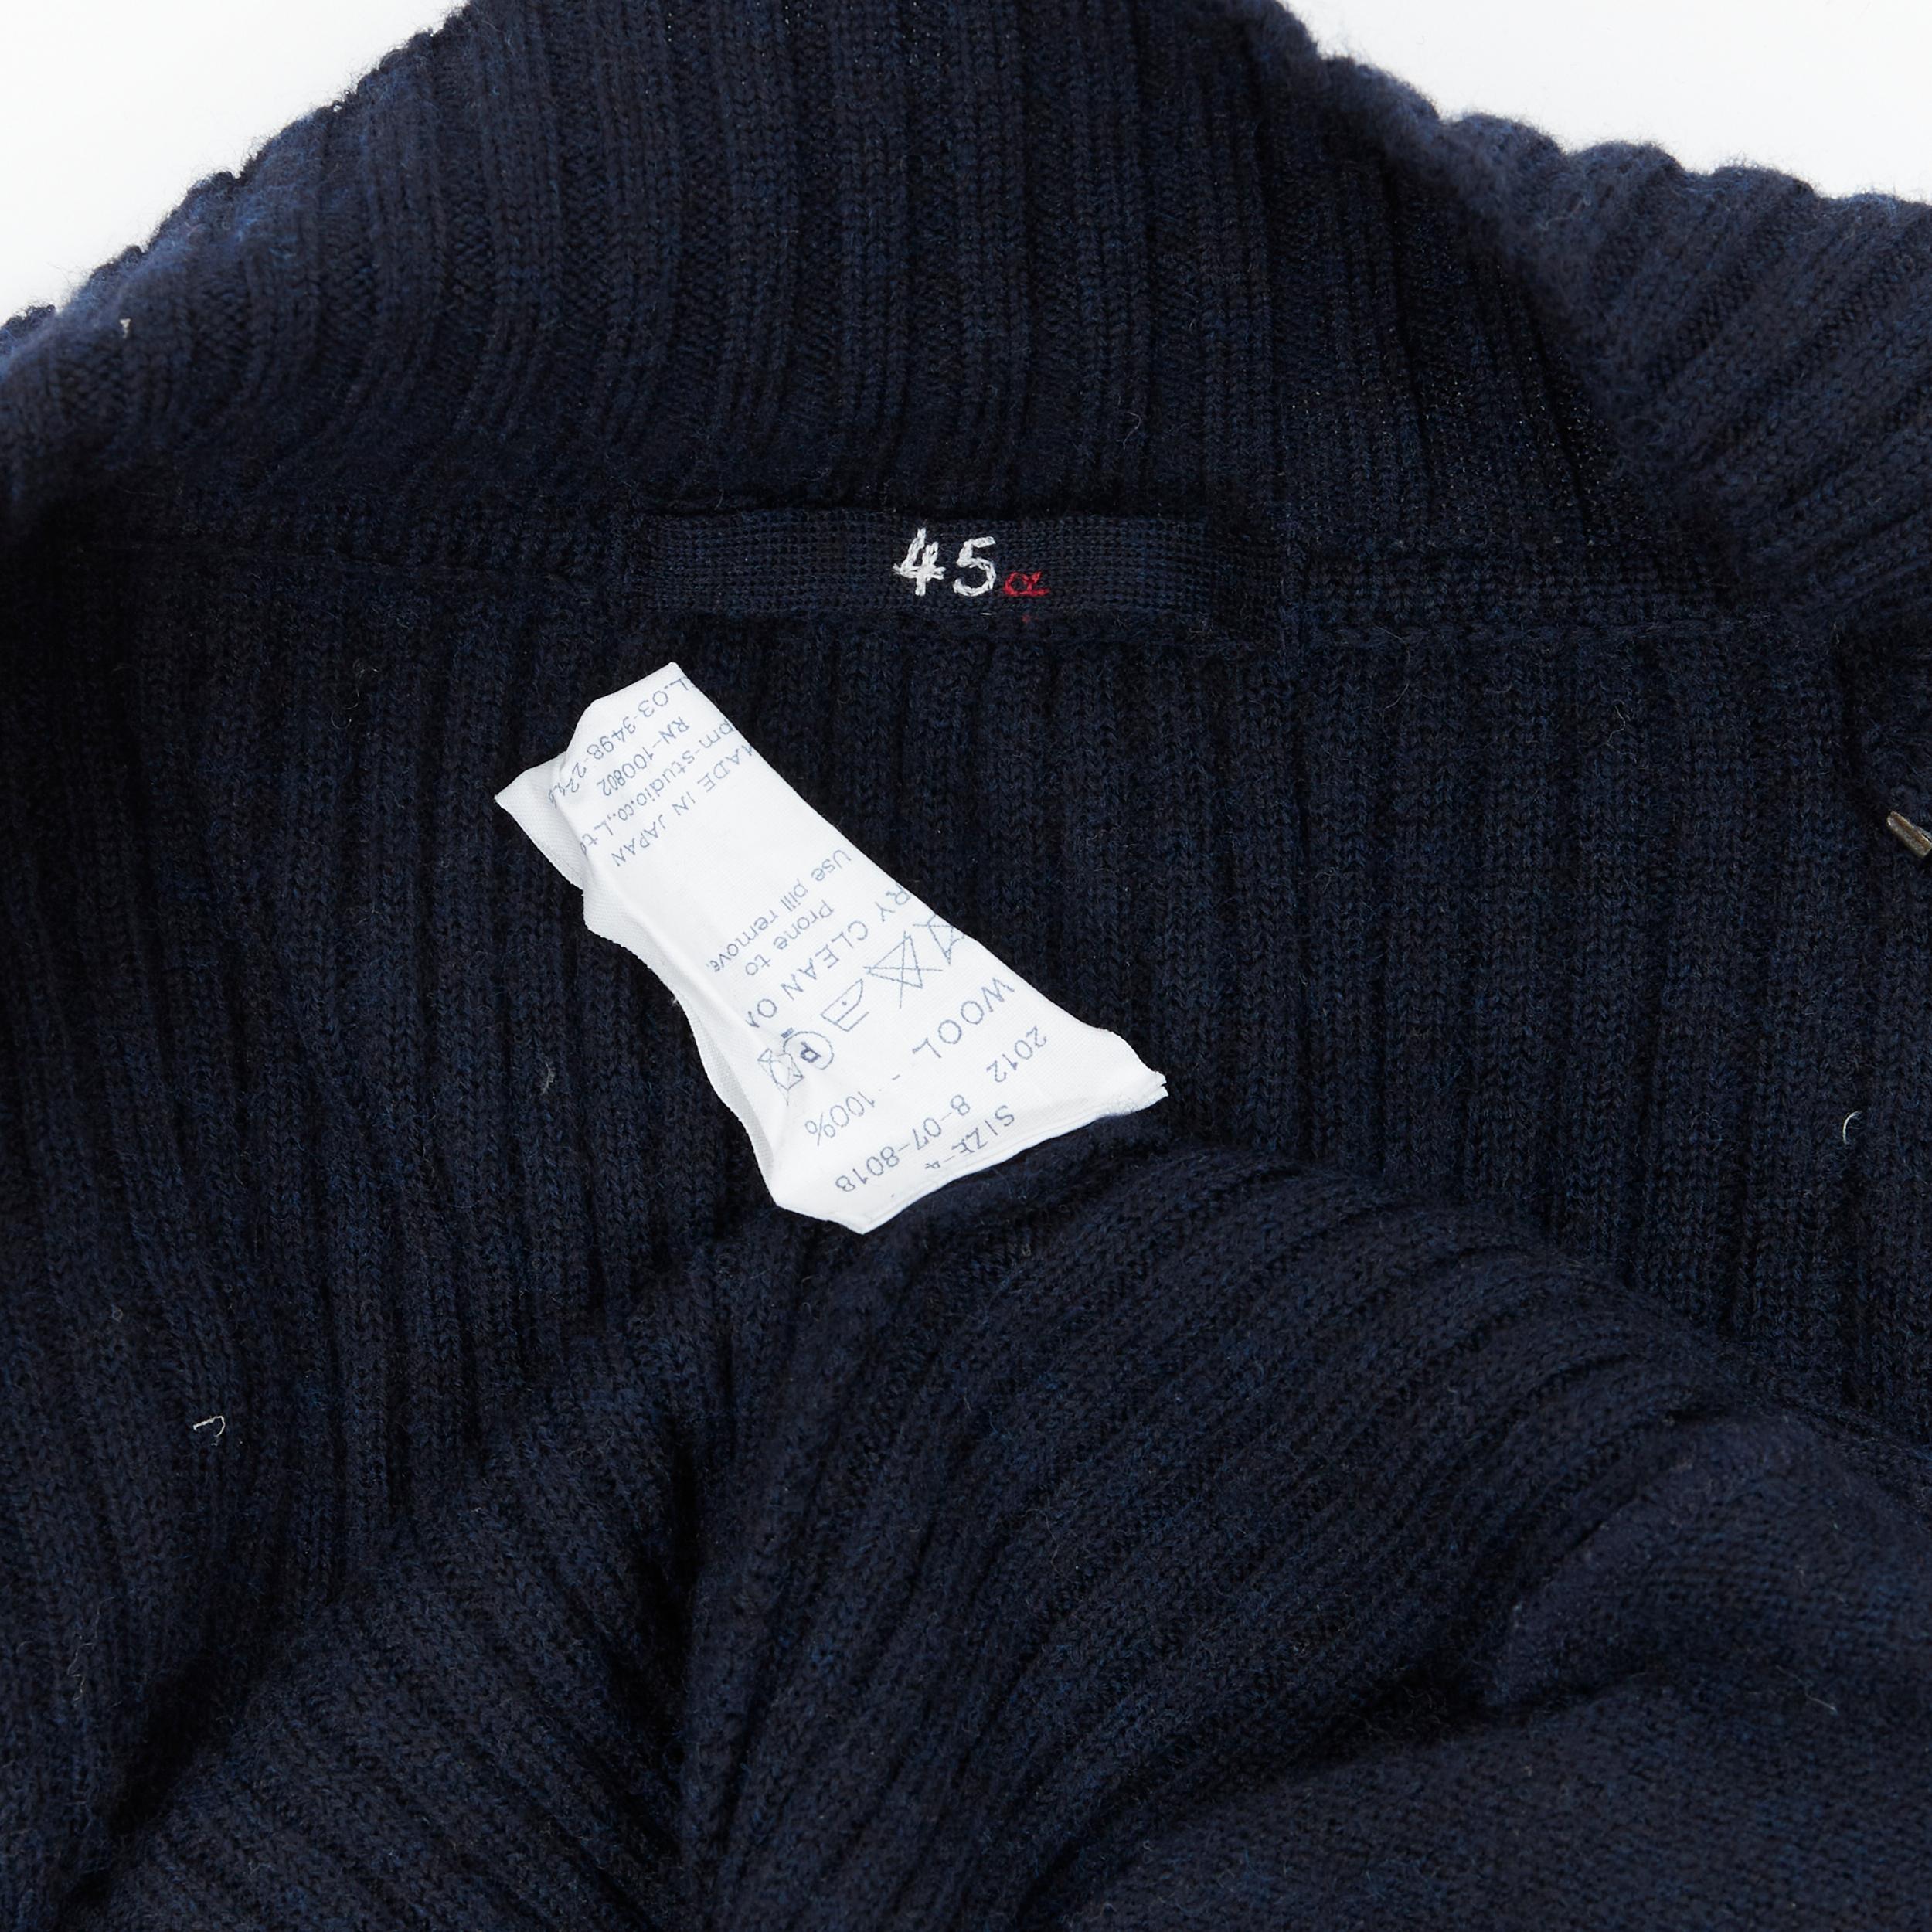 45R 100% wool navy blue ribbed knit zip military patch cardigan sweater JP4 S 4